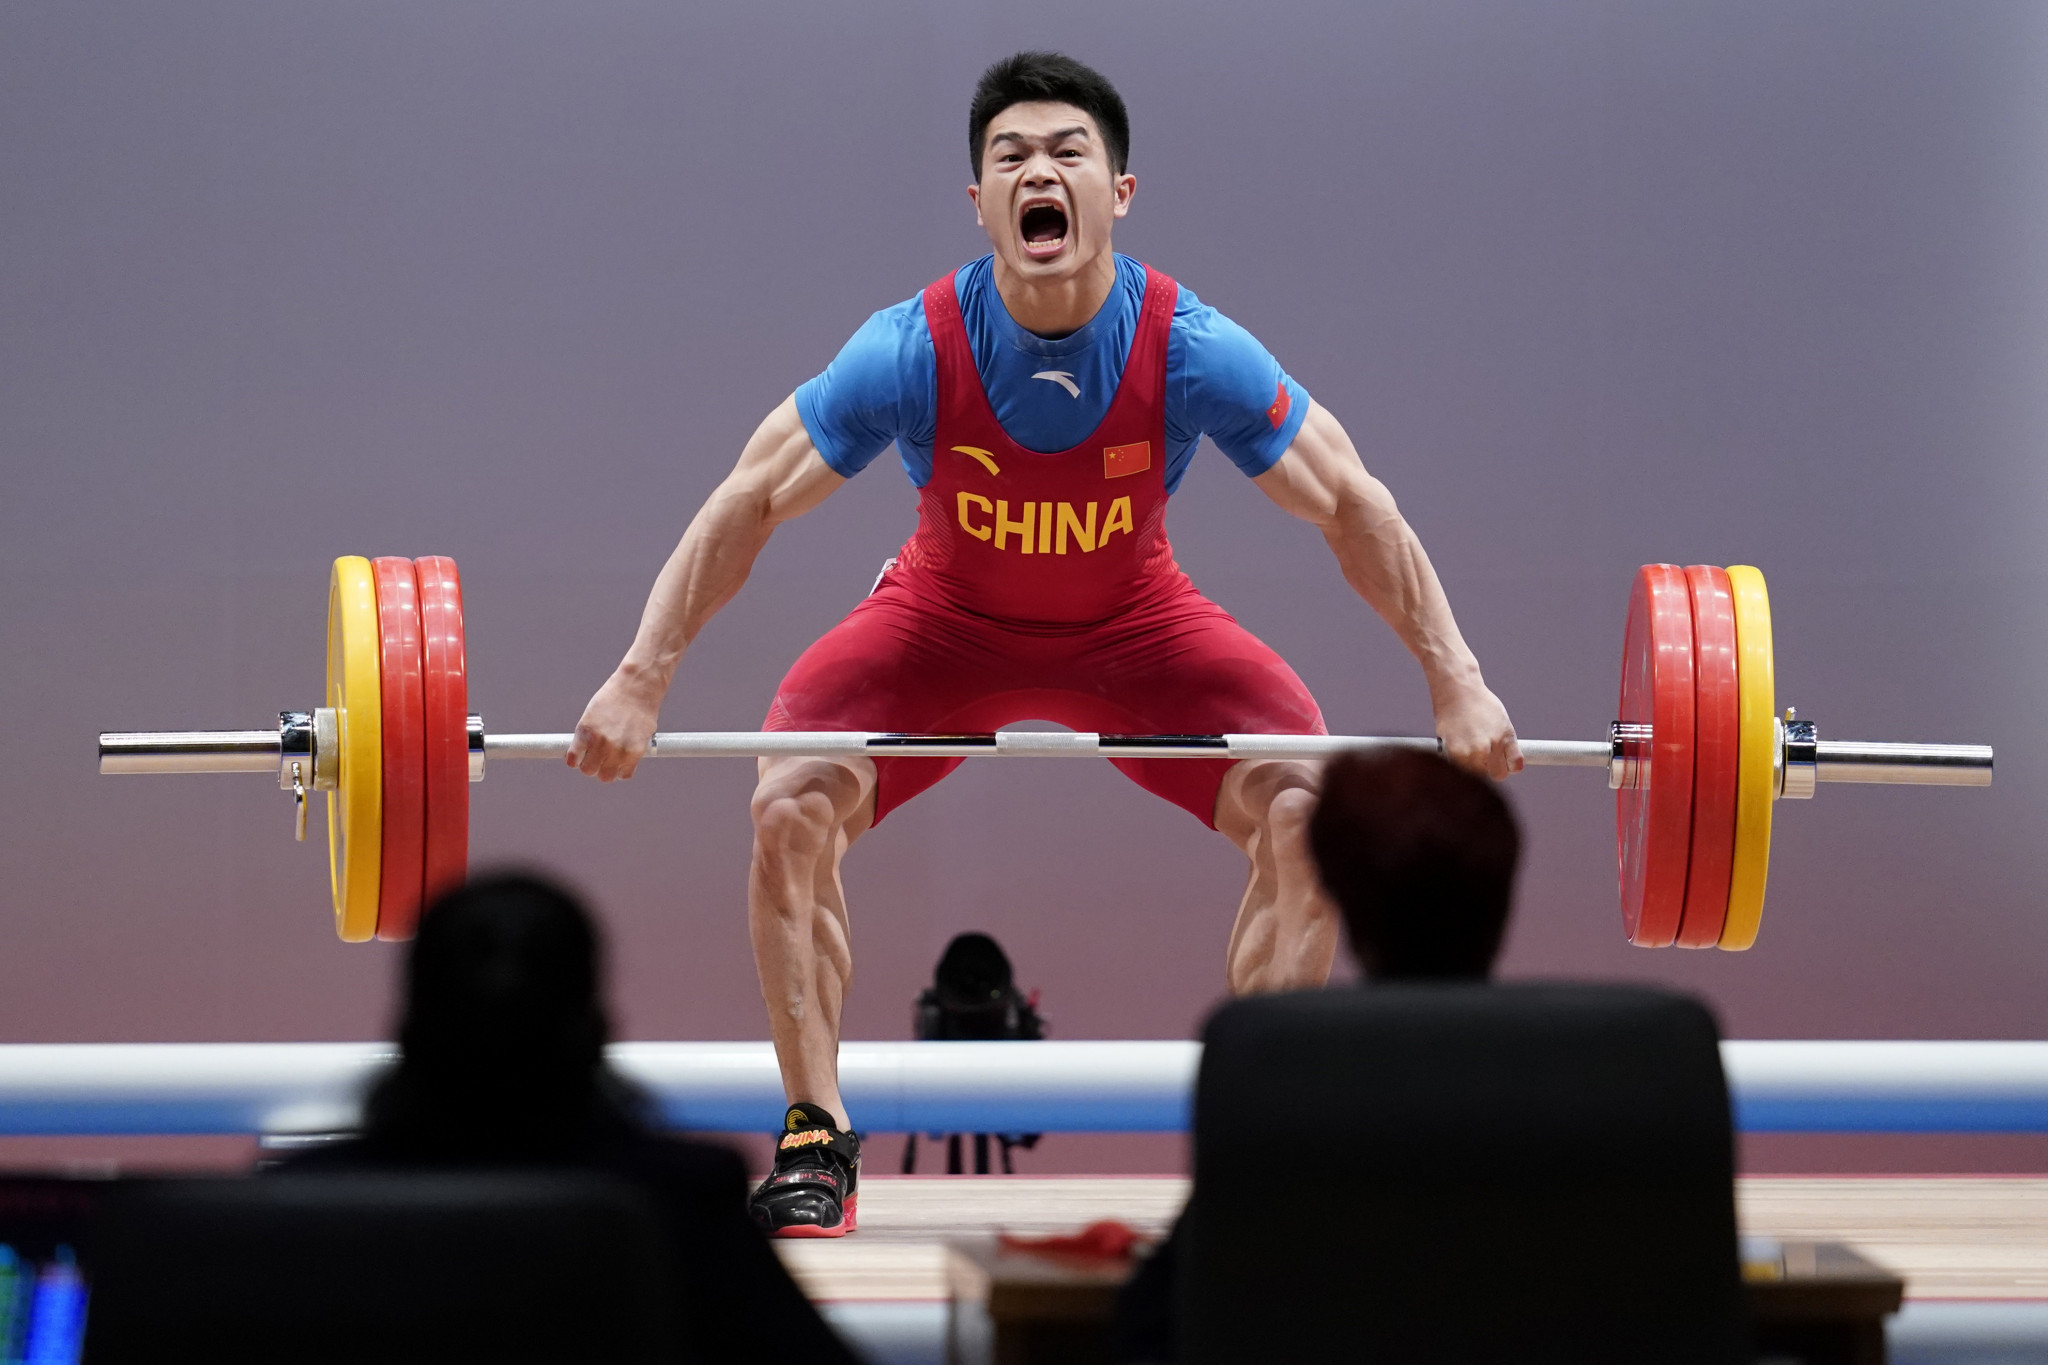 Shi Zhiyong equalled a world record lift at the Men's National Championships, but as it is not an international competition it is not classed as an official world record ©Getty Images